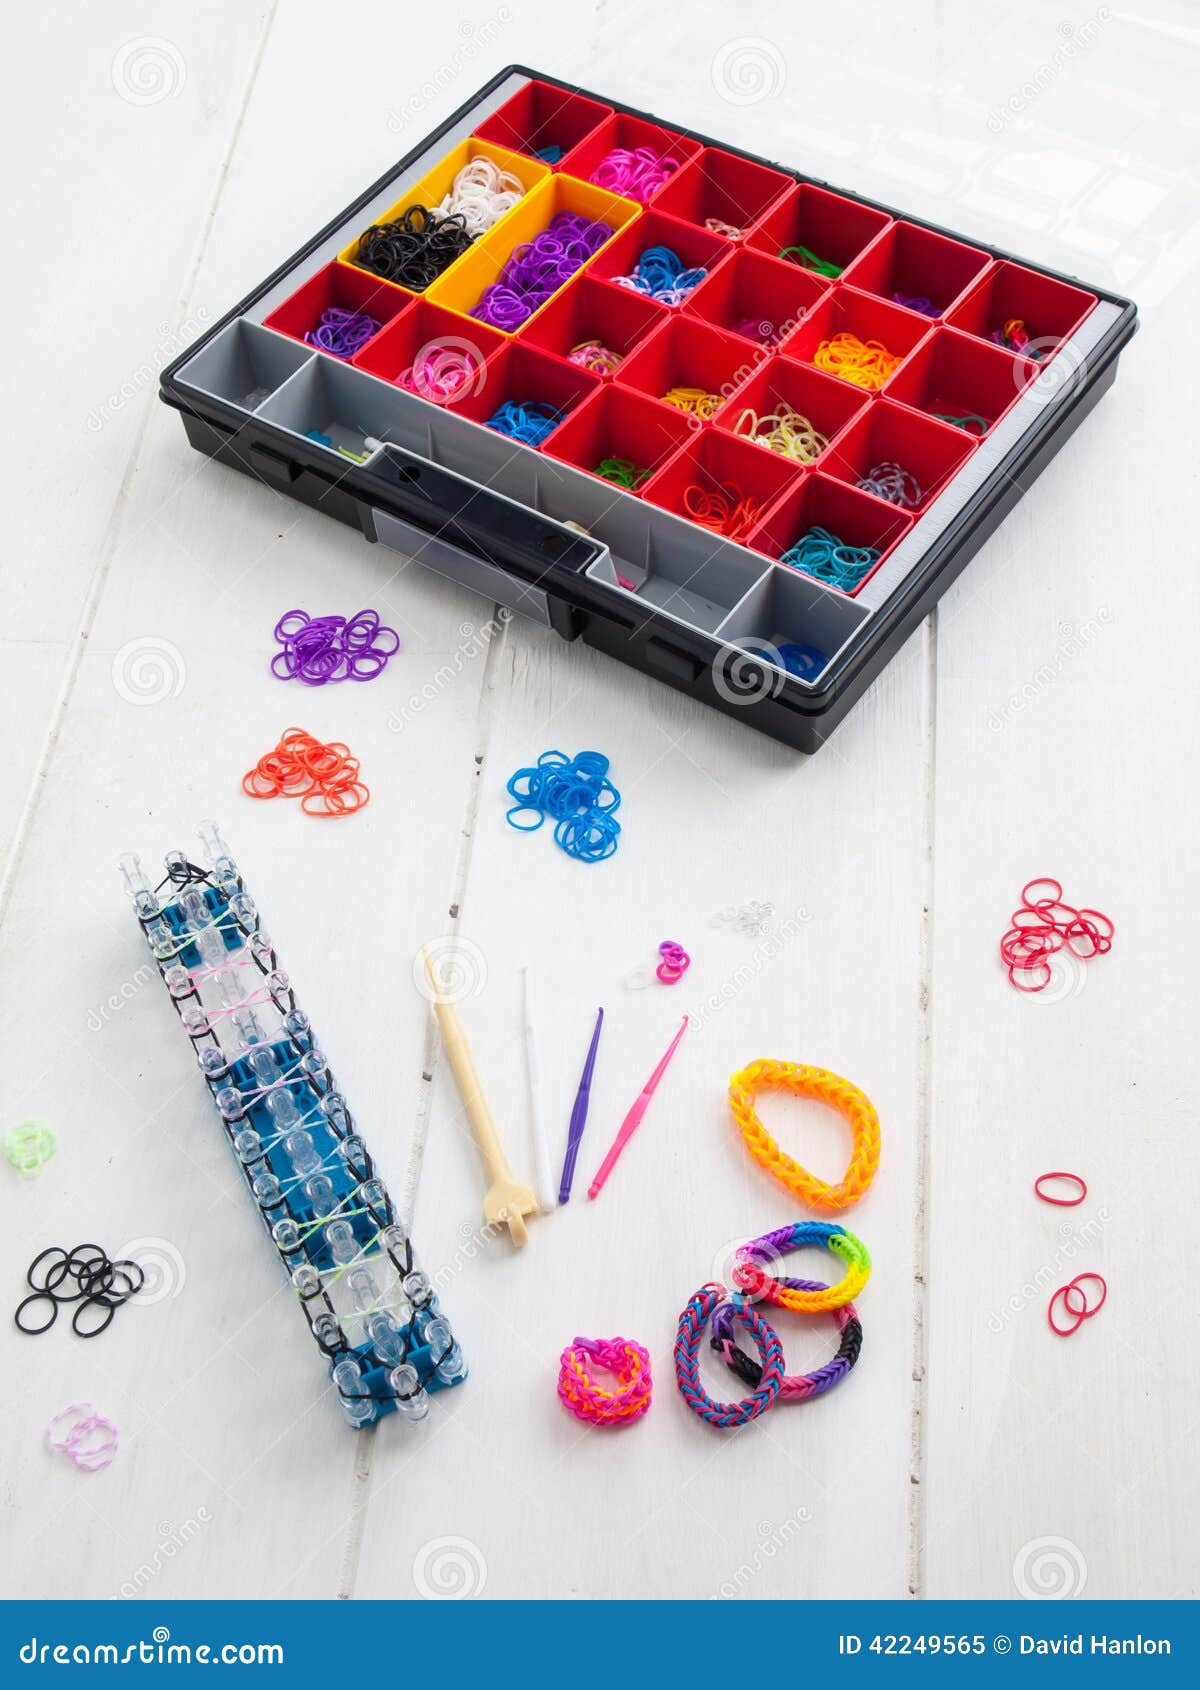  band loom , bracelets, tools and hobby box against a white table top